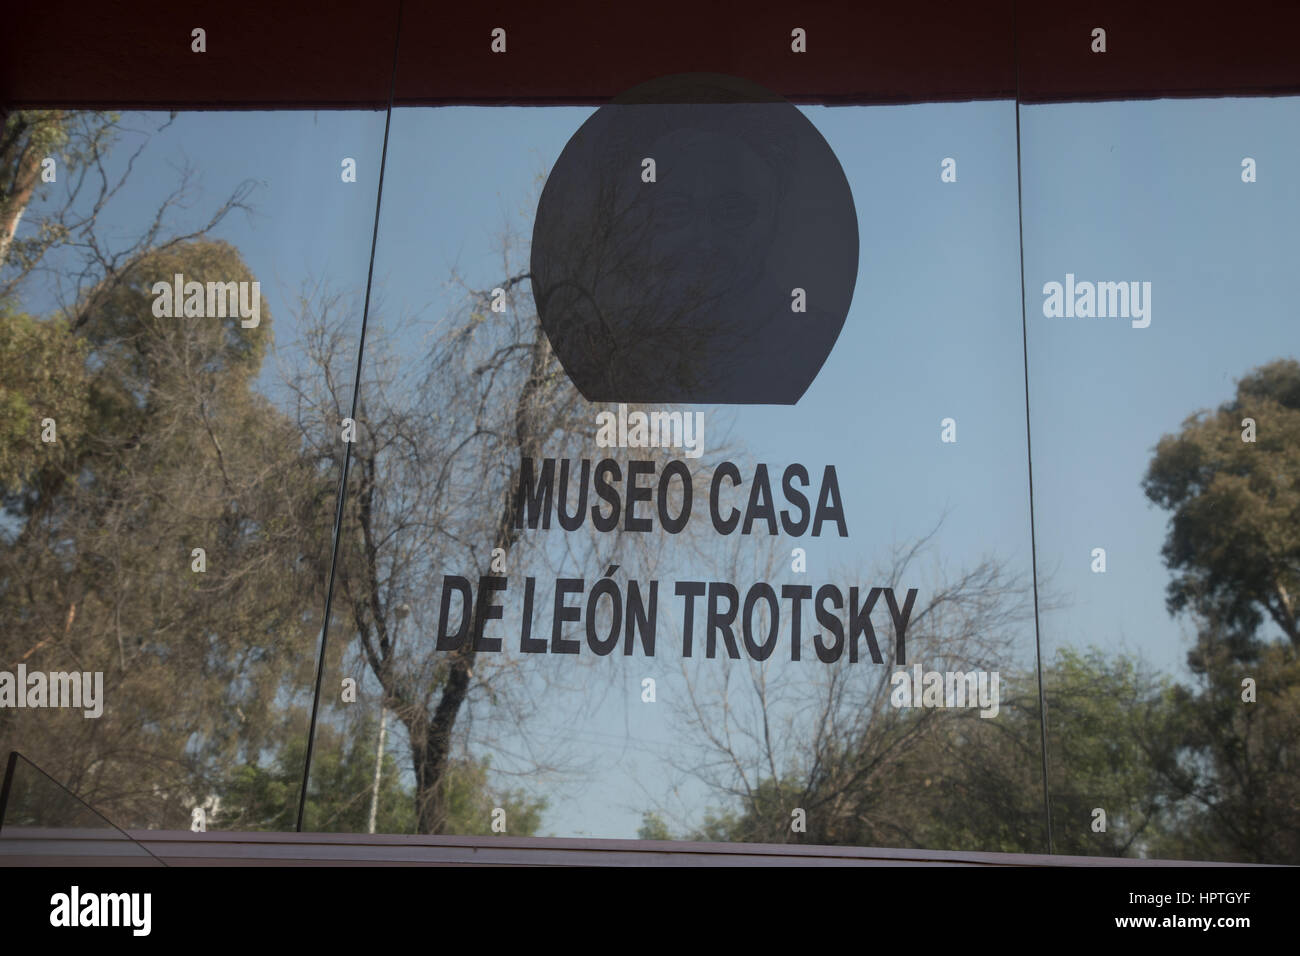 Mexico city, Mexico. Friday 24th February 2017. `Museum at Leon Trotsky's house in Mexico city mounting exhibition to highlight 100th anniversary of the start of the Russian revolution in February 2017.  Trotsky and Lenin were leading figures in the overthrow of the Russian czar. Trotsky lived in Mexico city in exile until he was assassinated in 1940 at his home where this museum was created preserving the house. Credit: WansfordPhoto/Alamy Live News Stock Photo